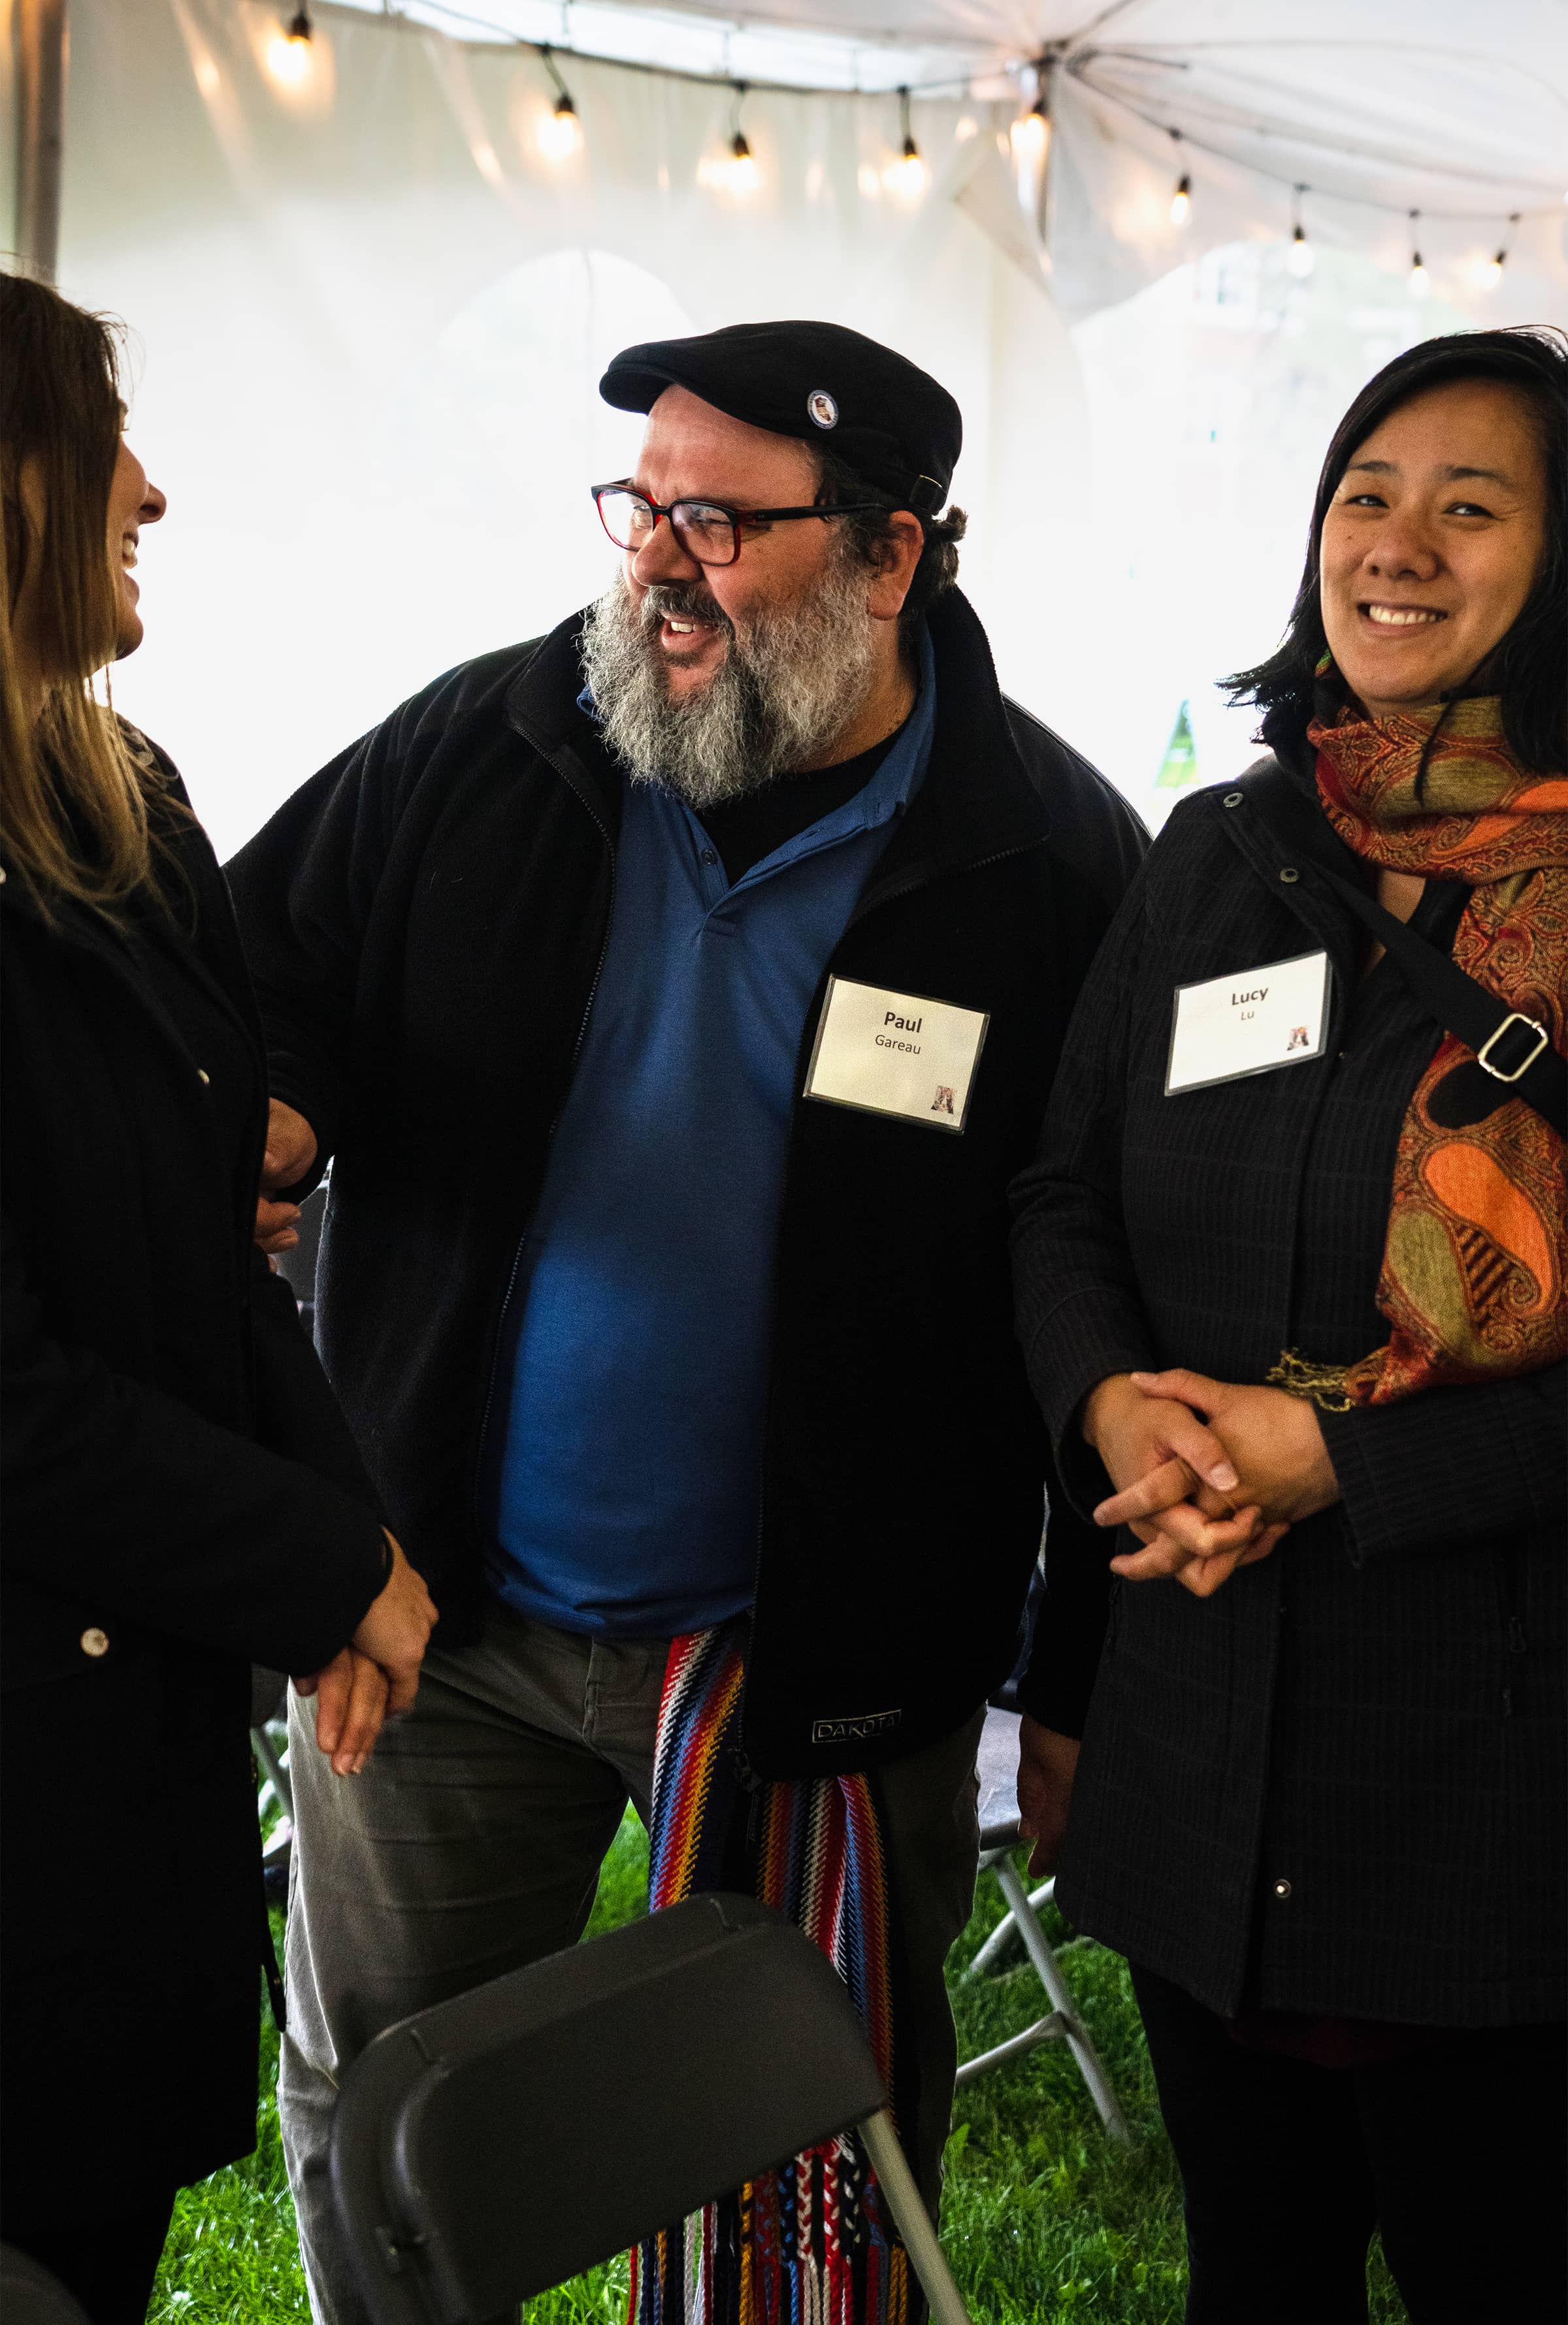 Paul Gareau, assistant professor in the Faculty of Native Studies, and Lucy Lu share a laugh.